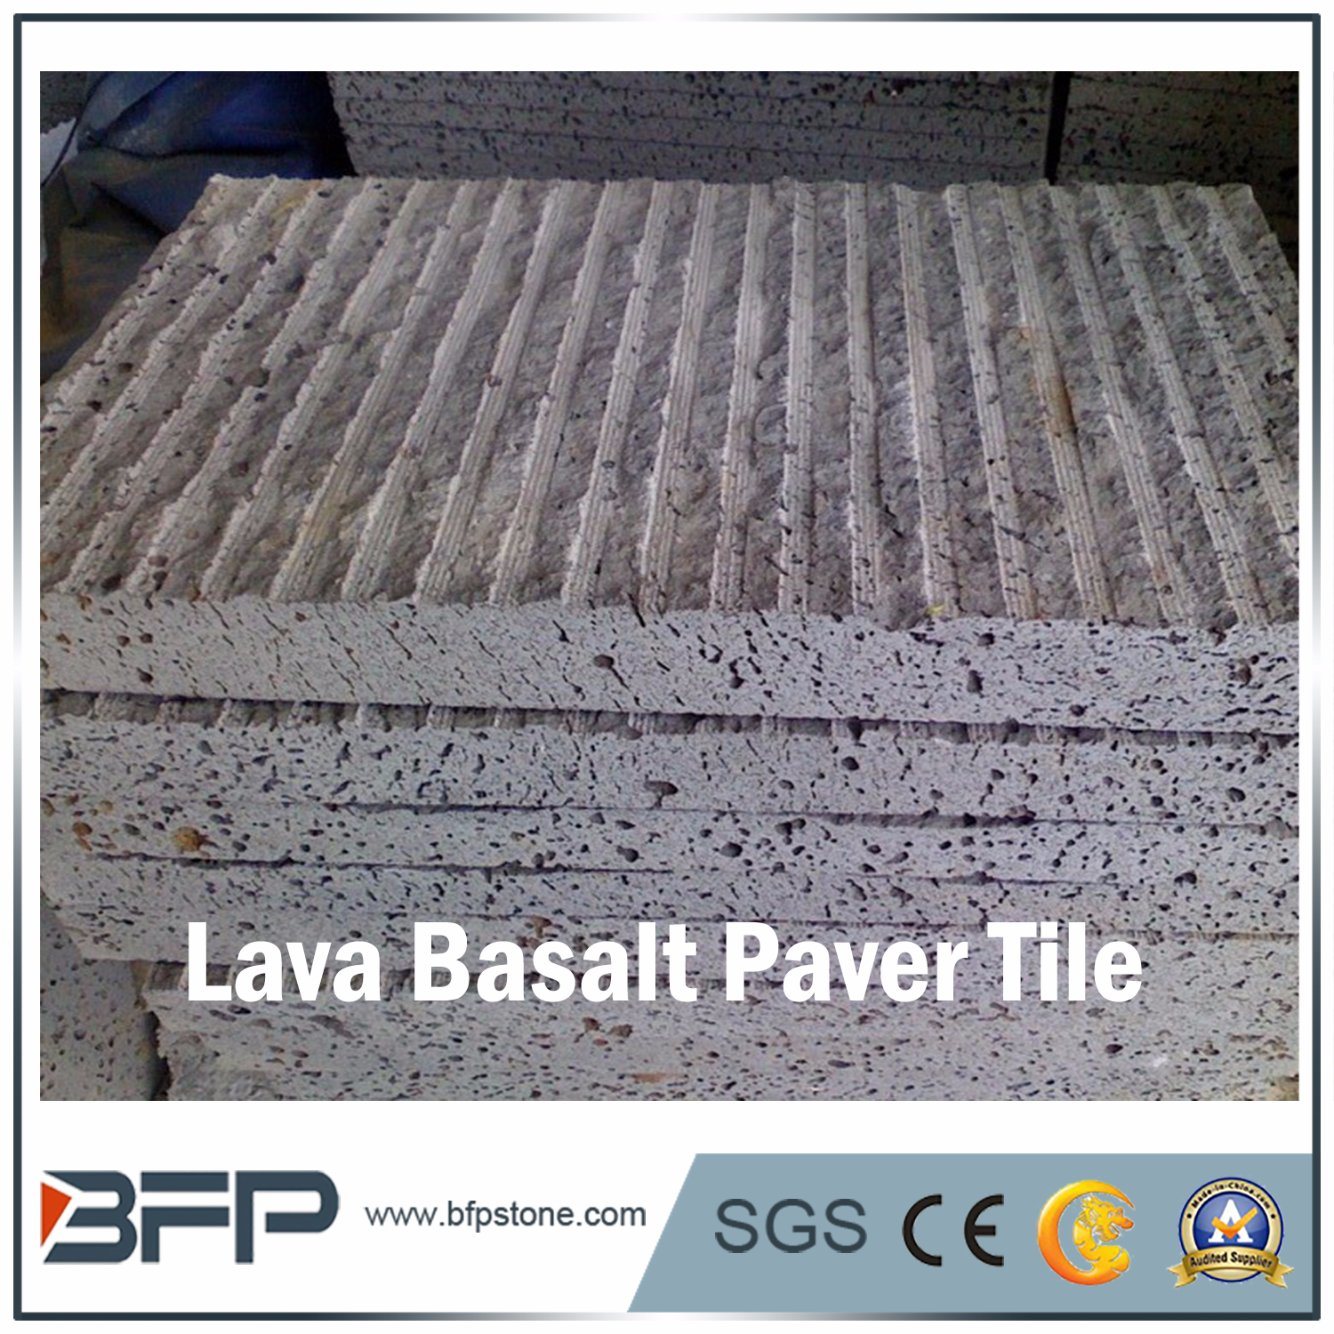 Natural Stone Grey Granite for Landscape Paver and Garden Paving